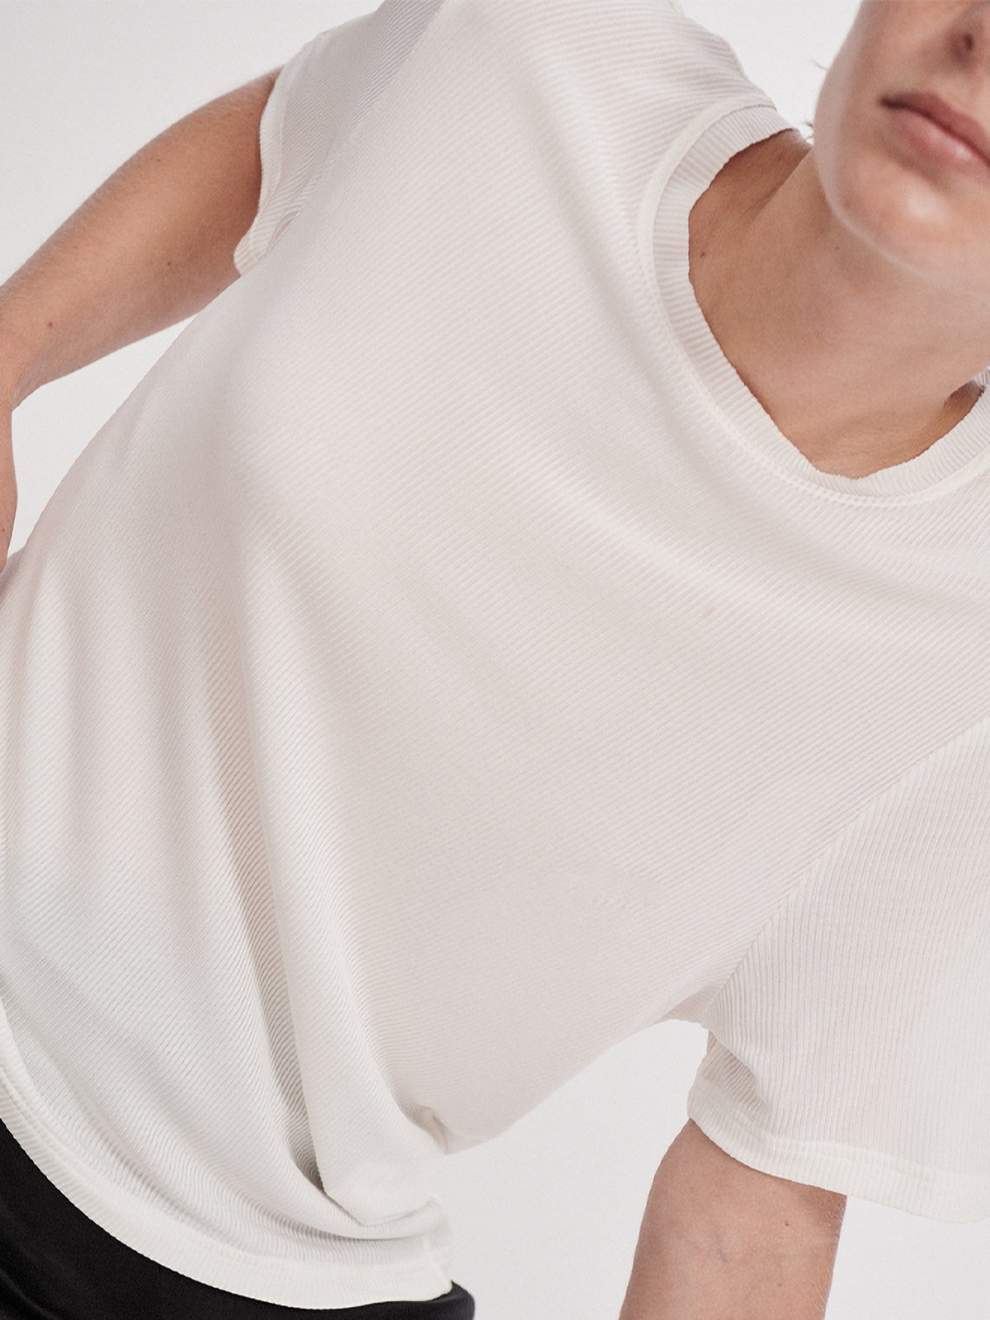 Model shot of Silk White Ribbed T-shirt by Silk Laundry.